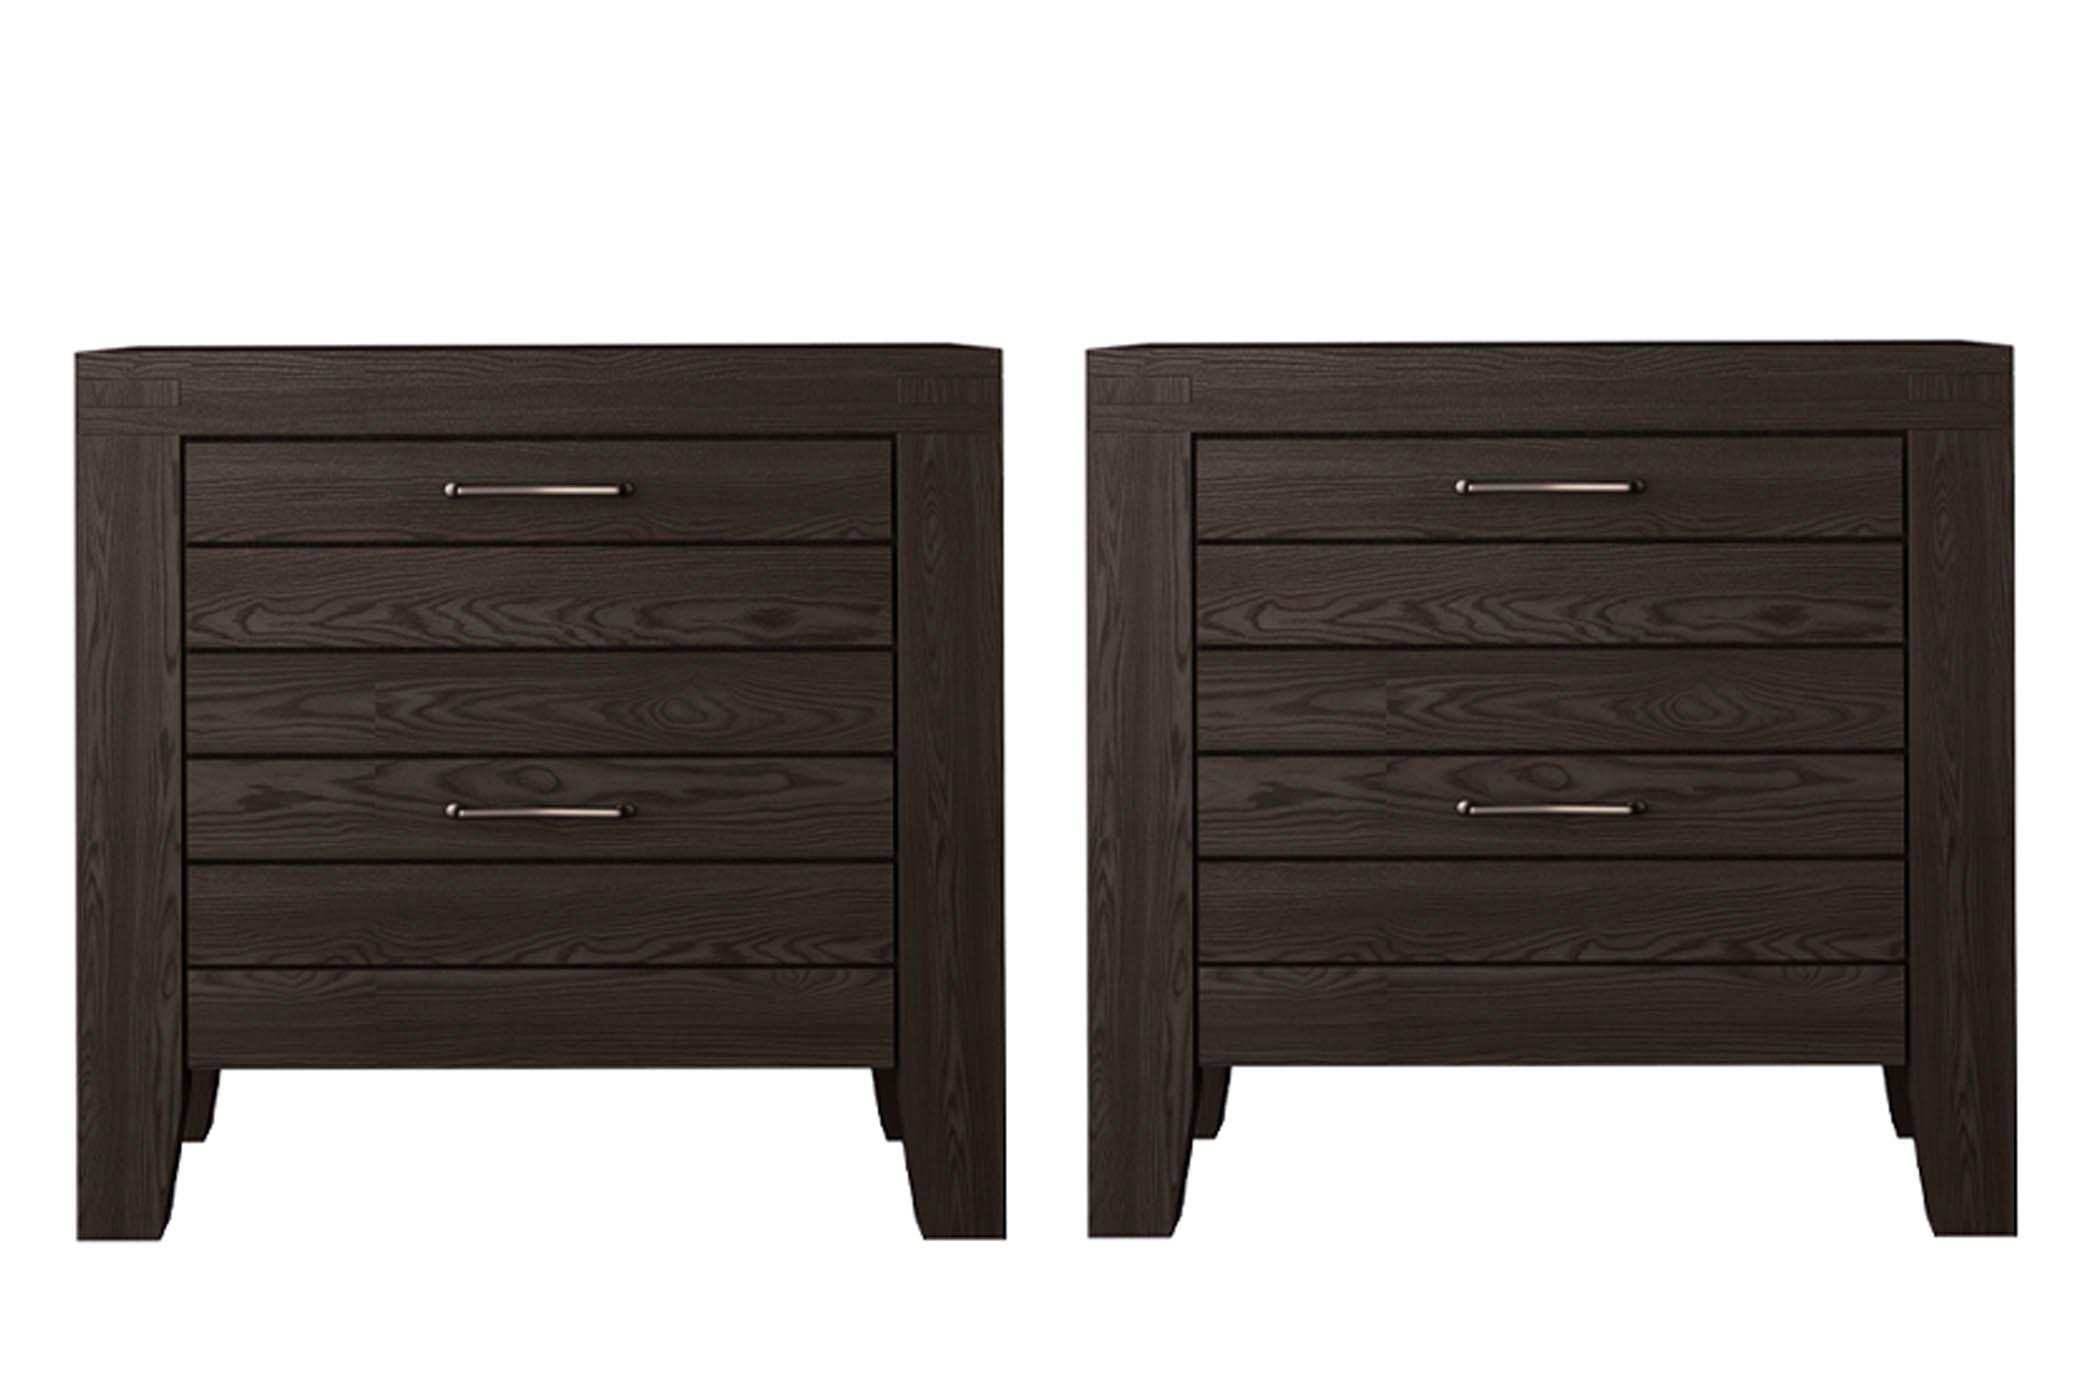 Contemporary, Traditional Nightstand Set CRESTWOOD 1465-120-Set 1465-120-Set in Auburn, Brown 